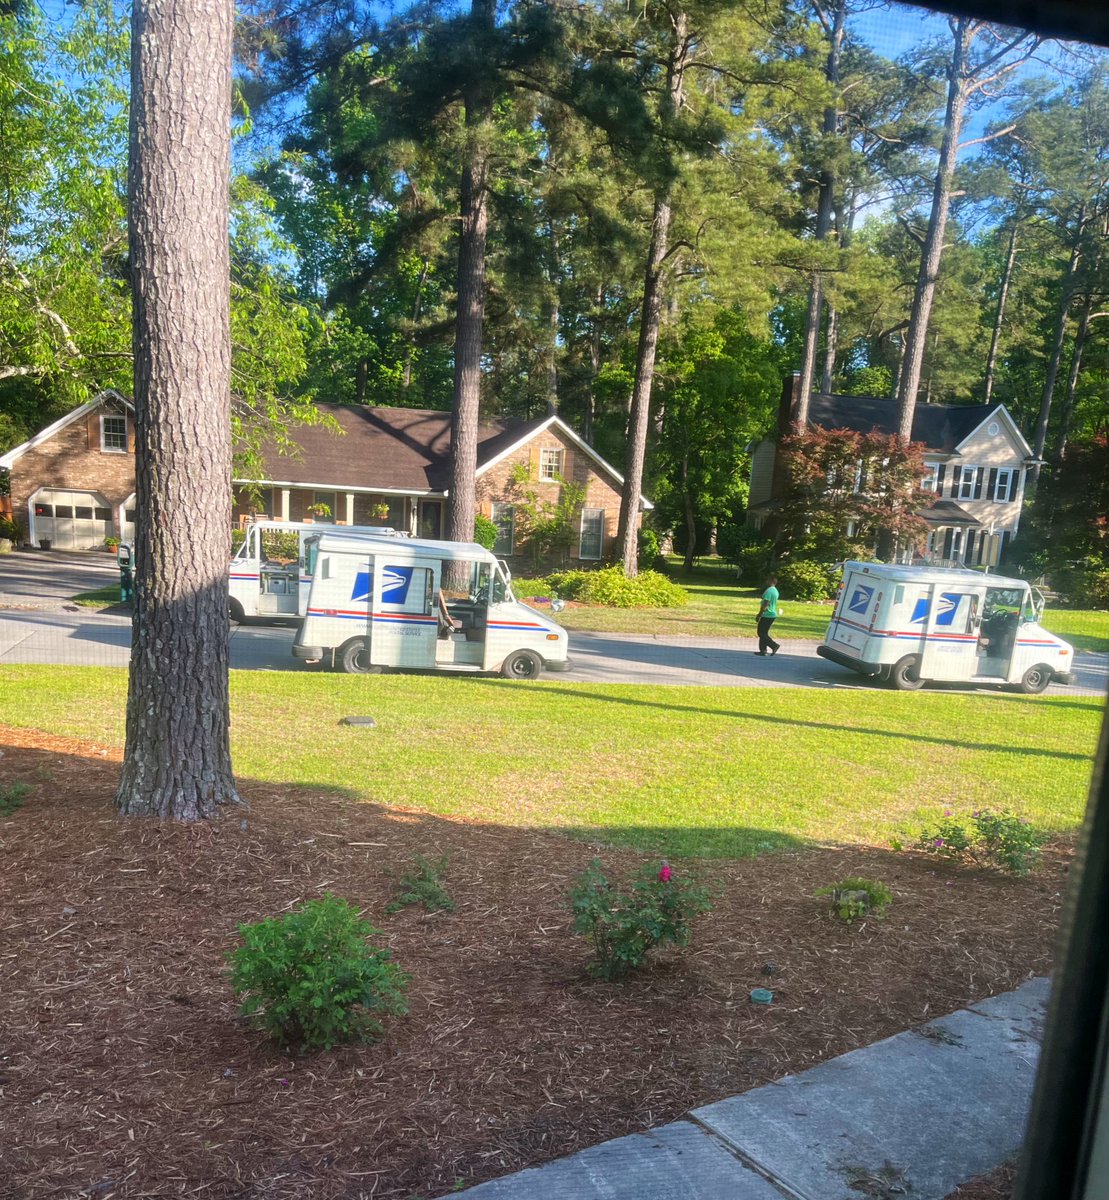 Three mail trucks at our house is a rare sight